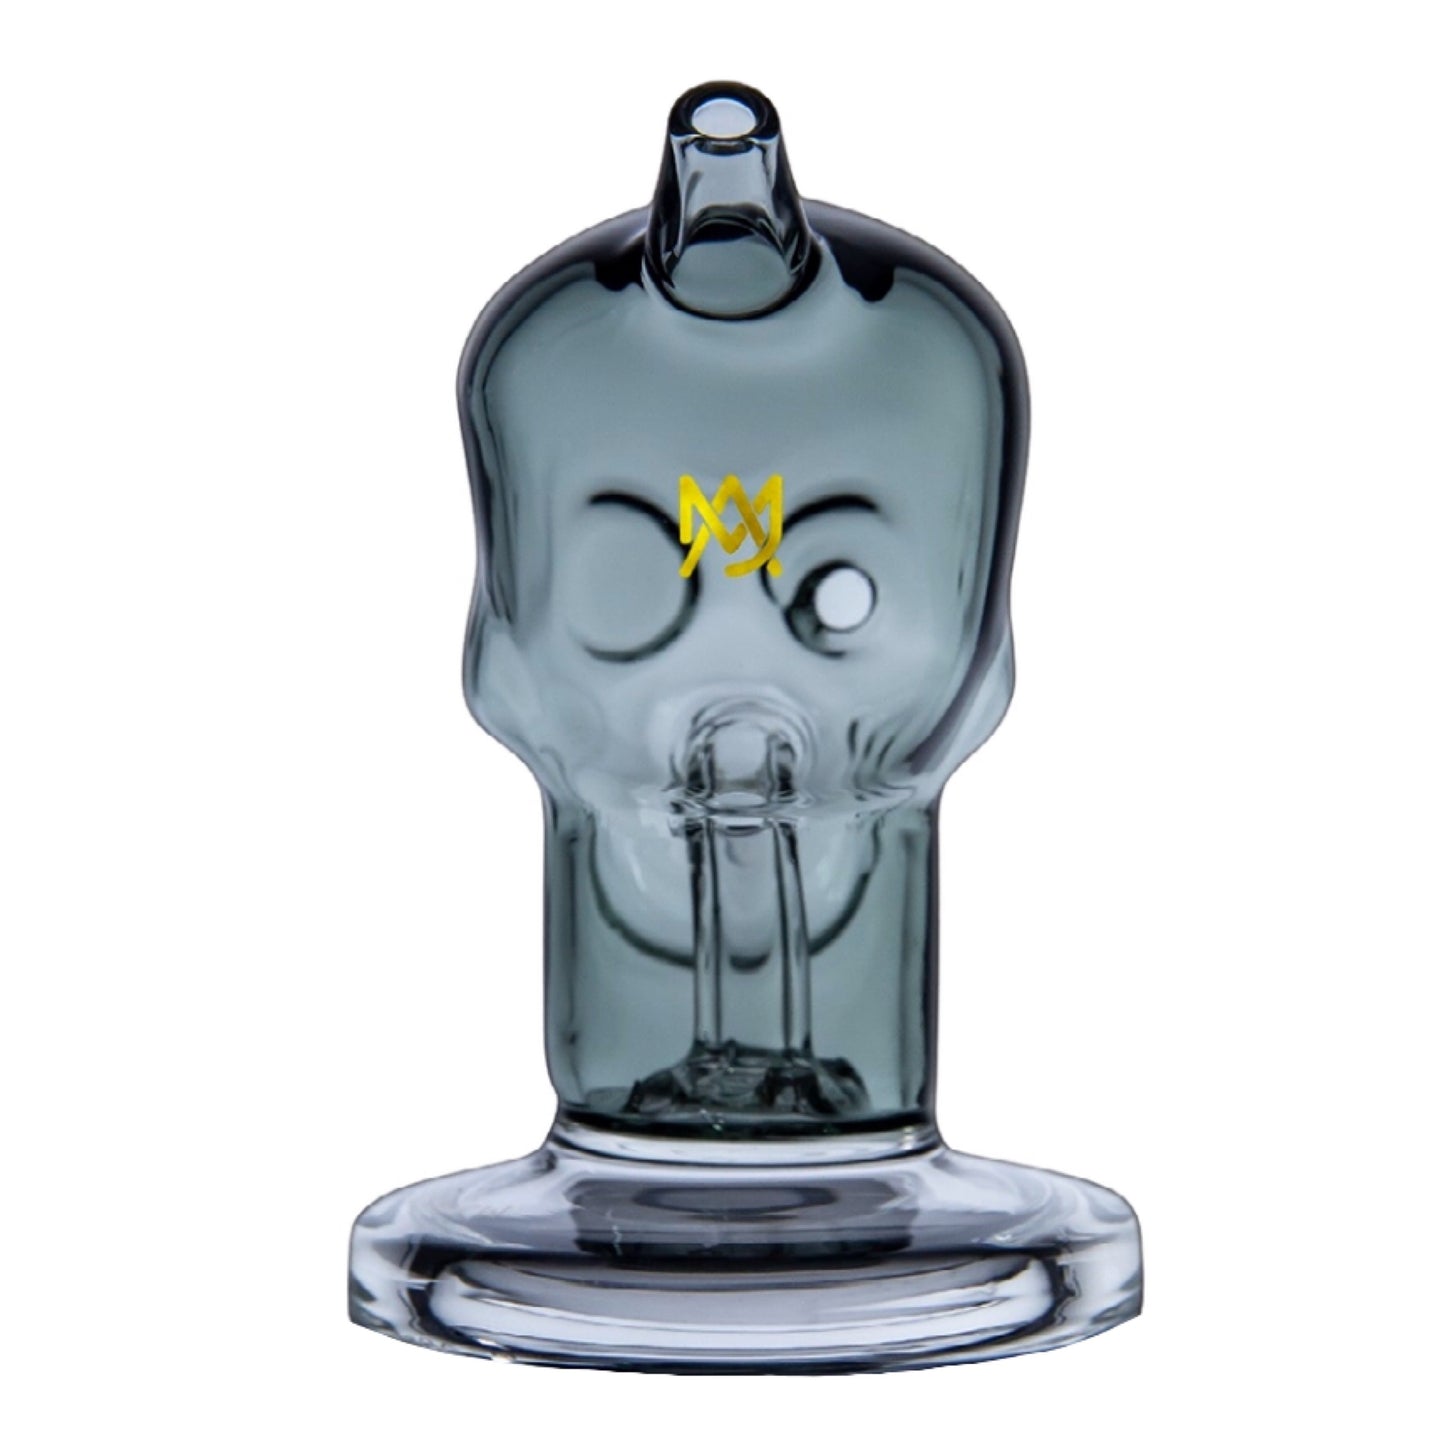 MJ Arsenal Limited Edition Rip'r Blunt Bubbler